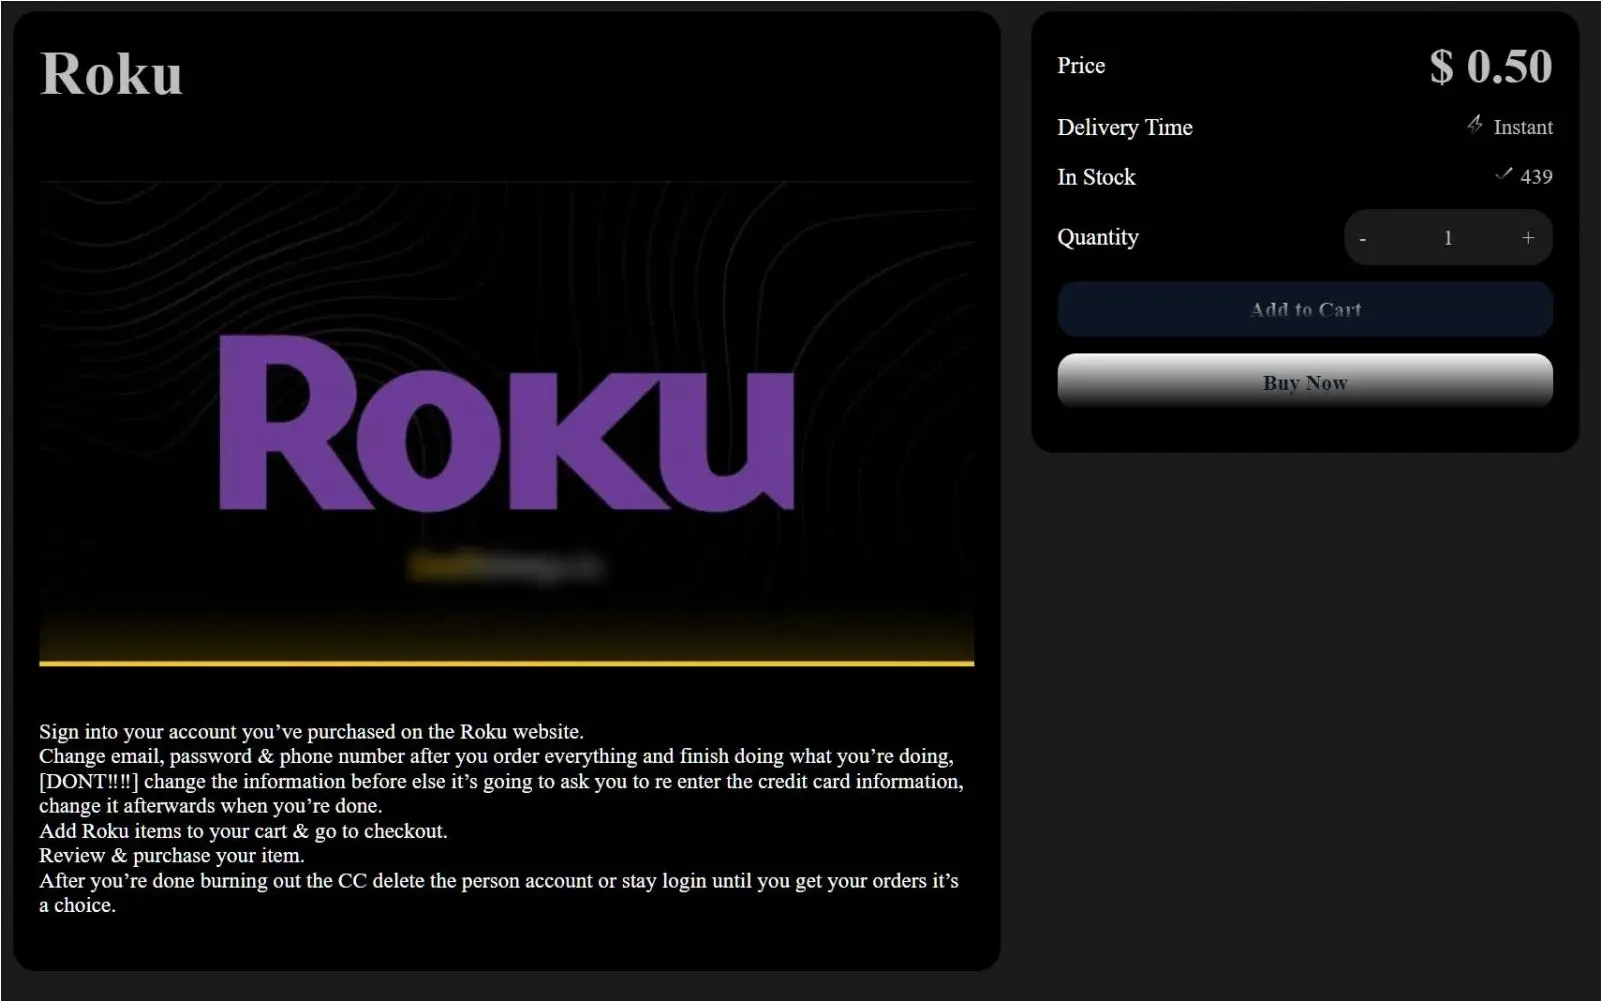 Stolen Roku accounts sold for as little as $0.50 on a marketplace